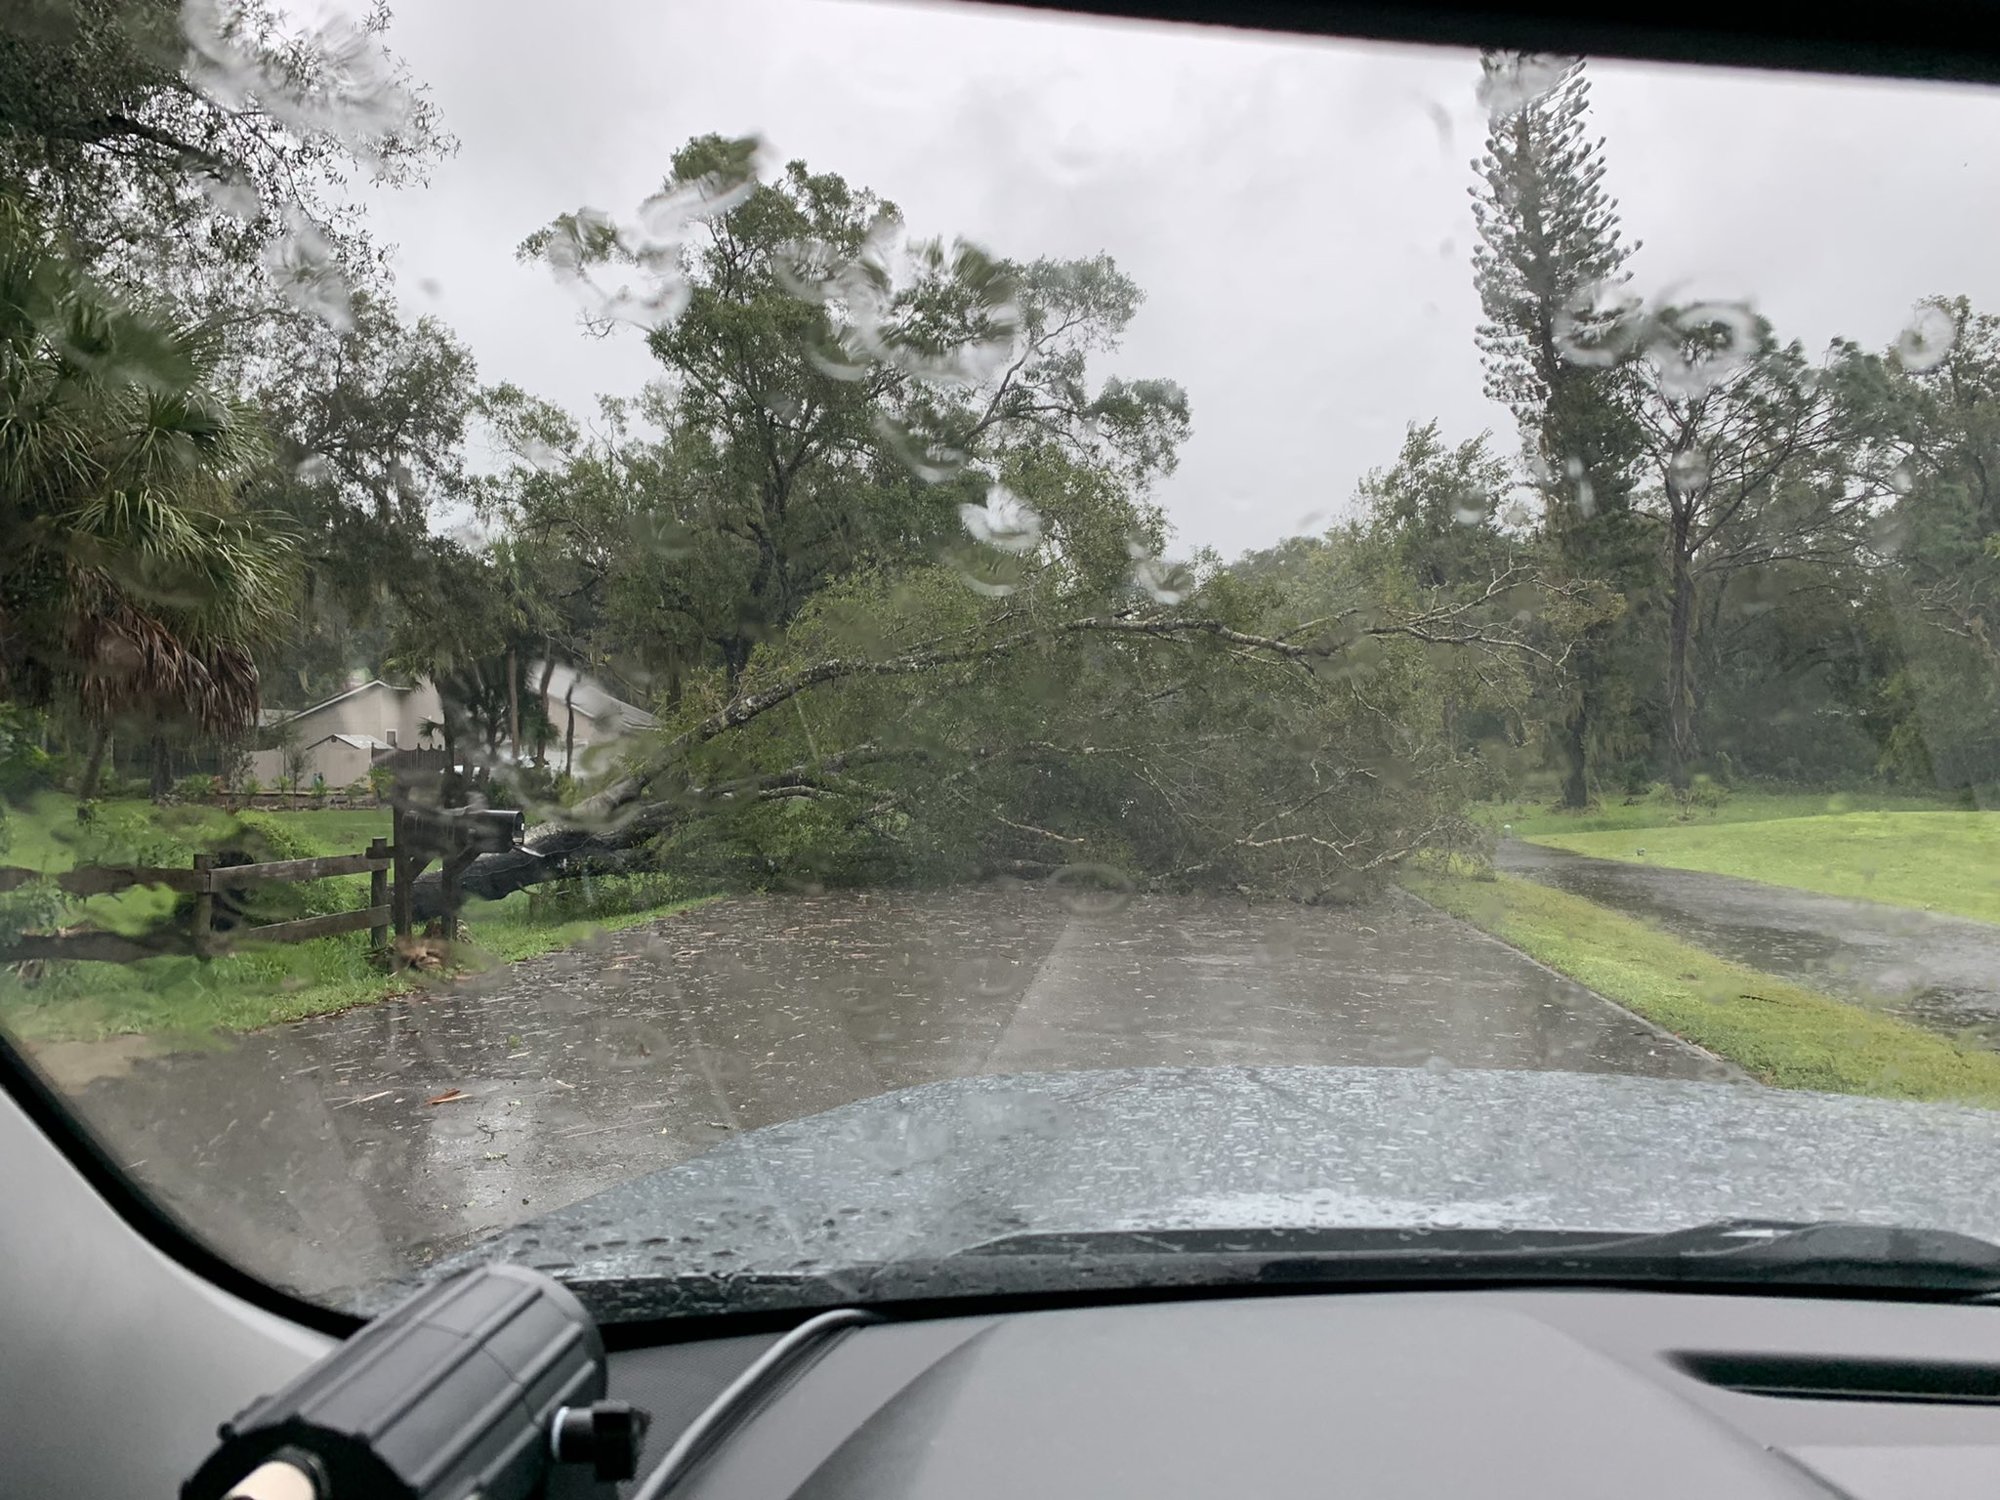 The Sarasota County Sheriff's Office shared at 11:15 a.m. Wednesday via social media images of damage including a fallen tree on Stone Ridge Trail.